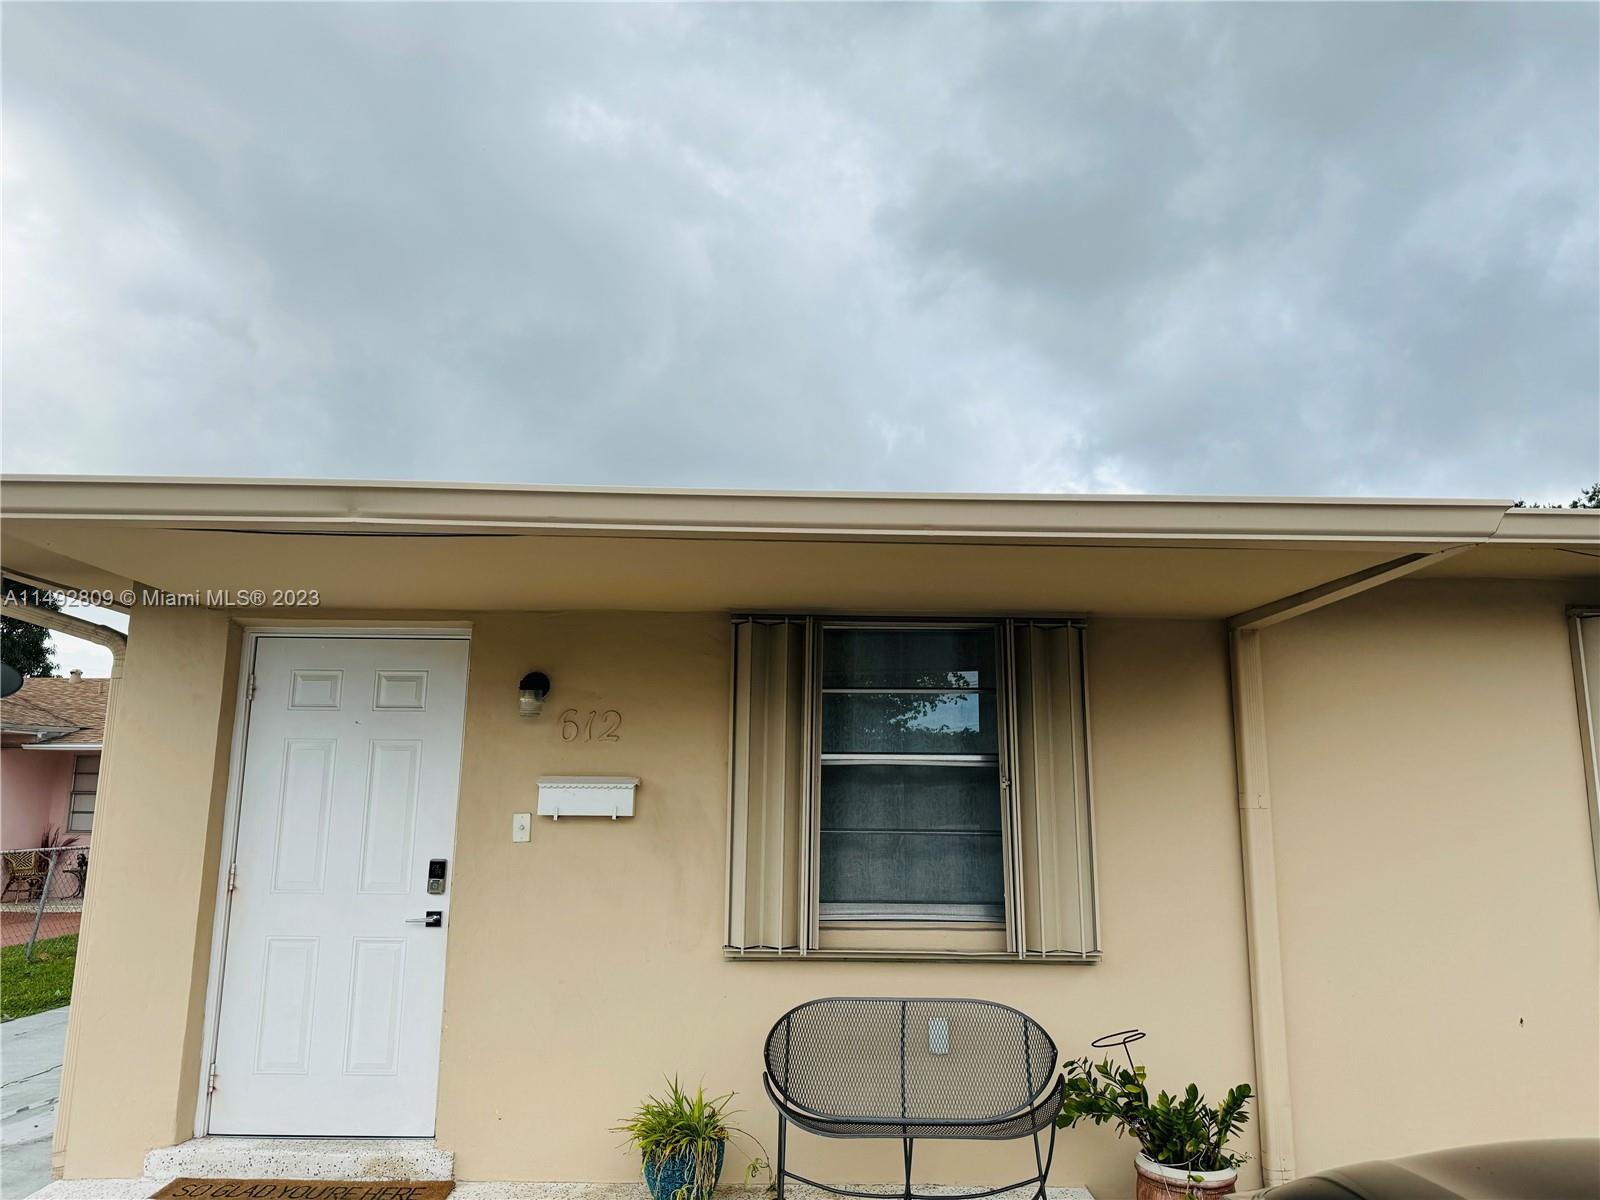 Photo of 612 NW 43rd #612 in Miami, FL